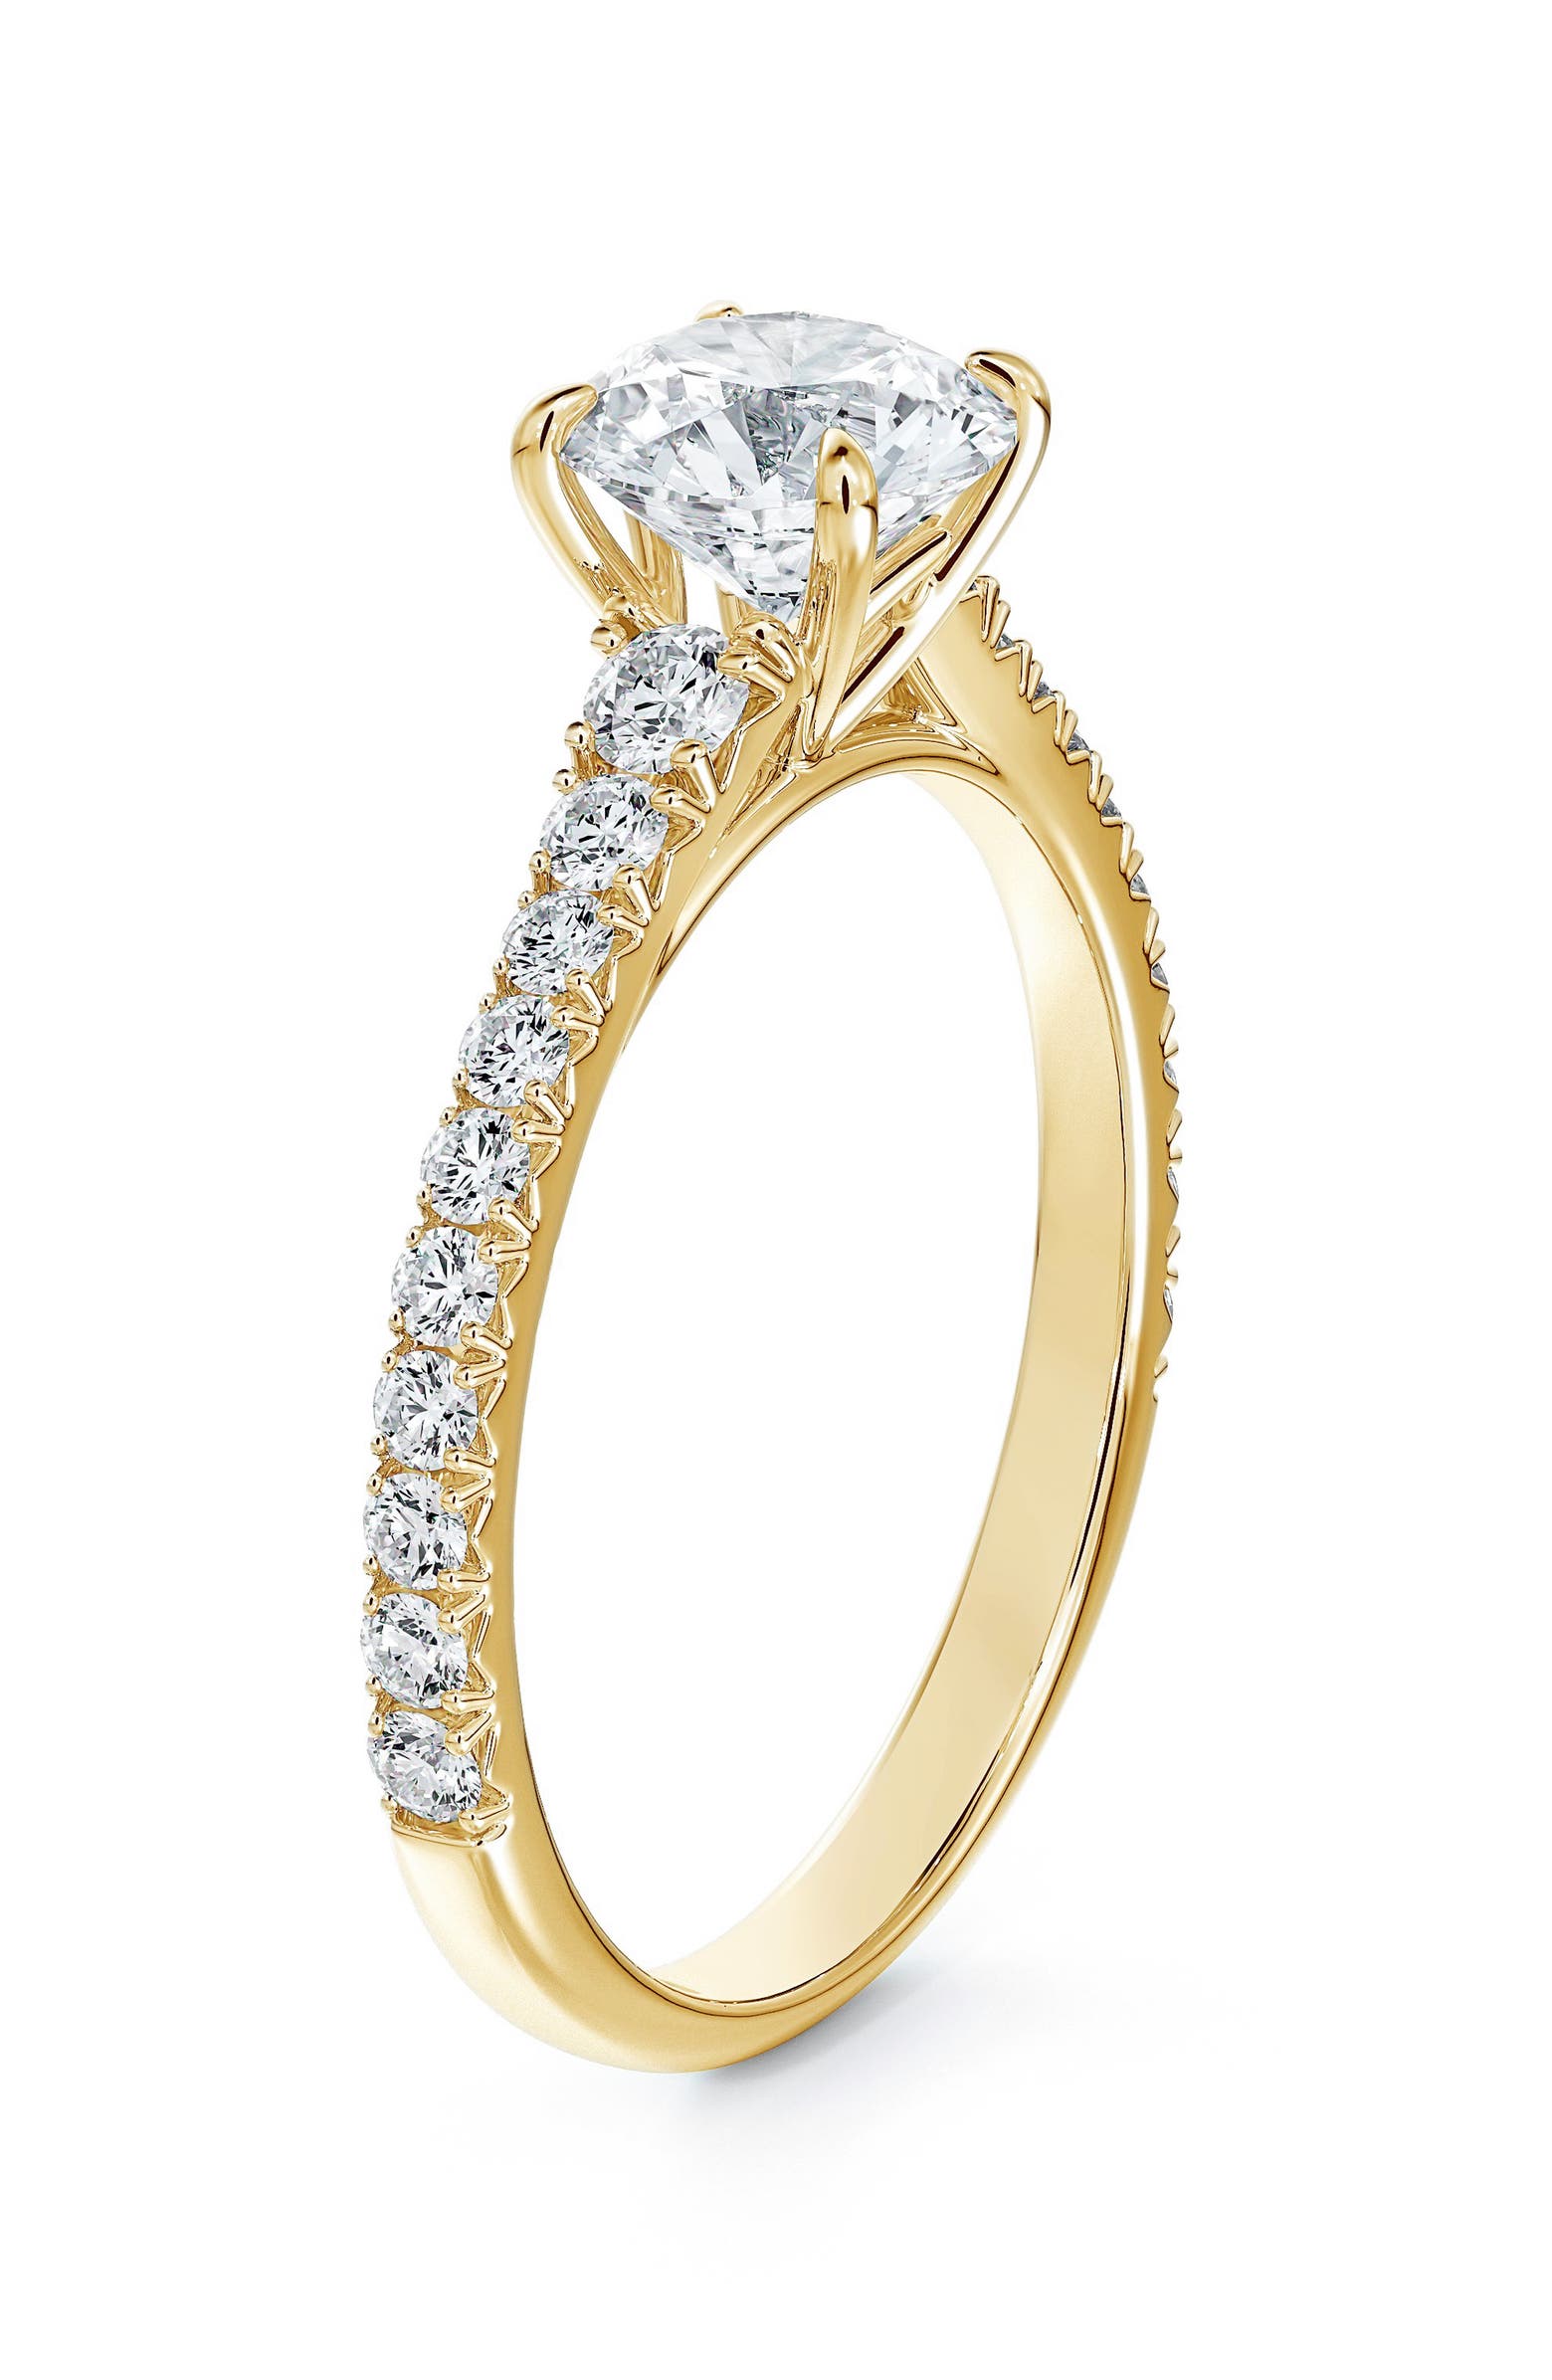 Gold diamond engagement ring from De Beers